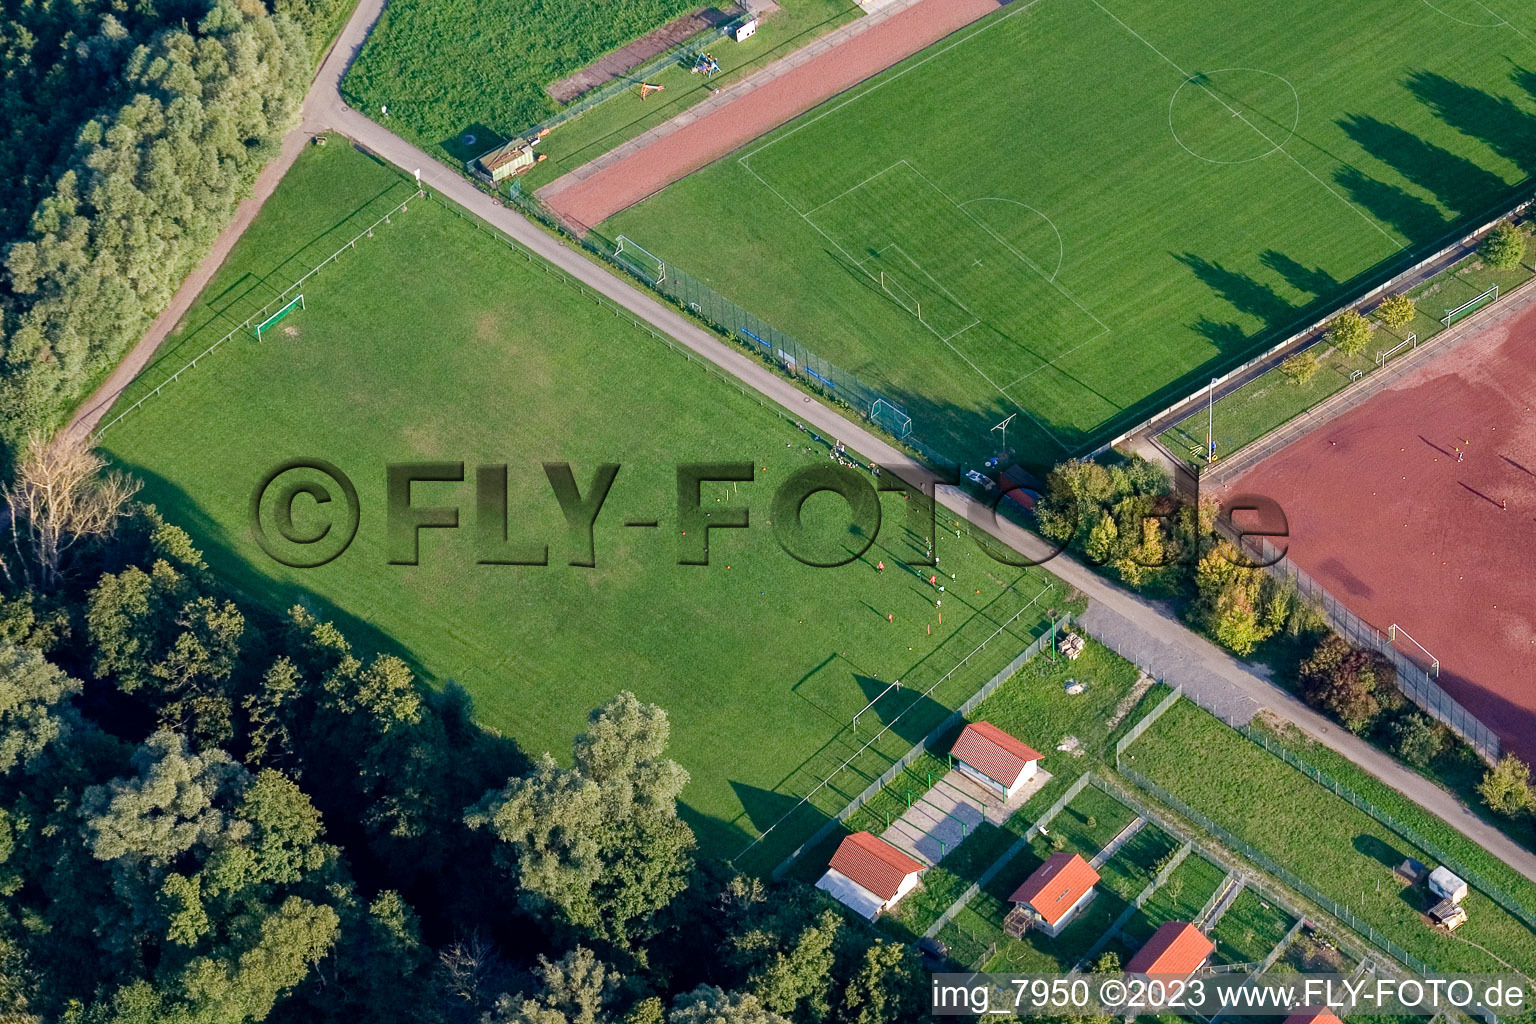 Oblique view of Sports fields in Neuburg in the state Rhineland-Palatinate, Germany